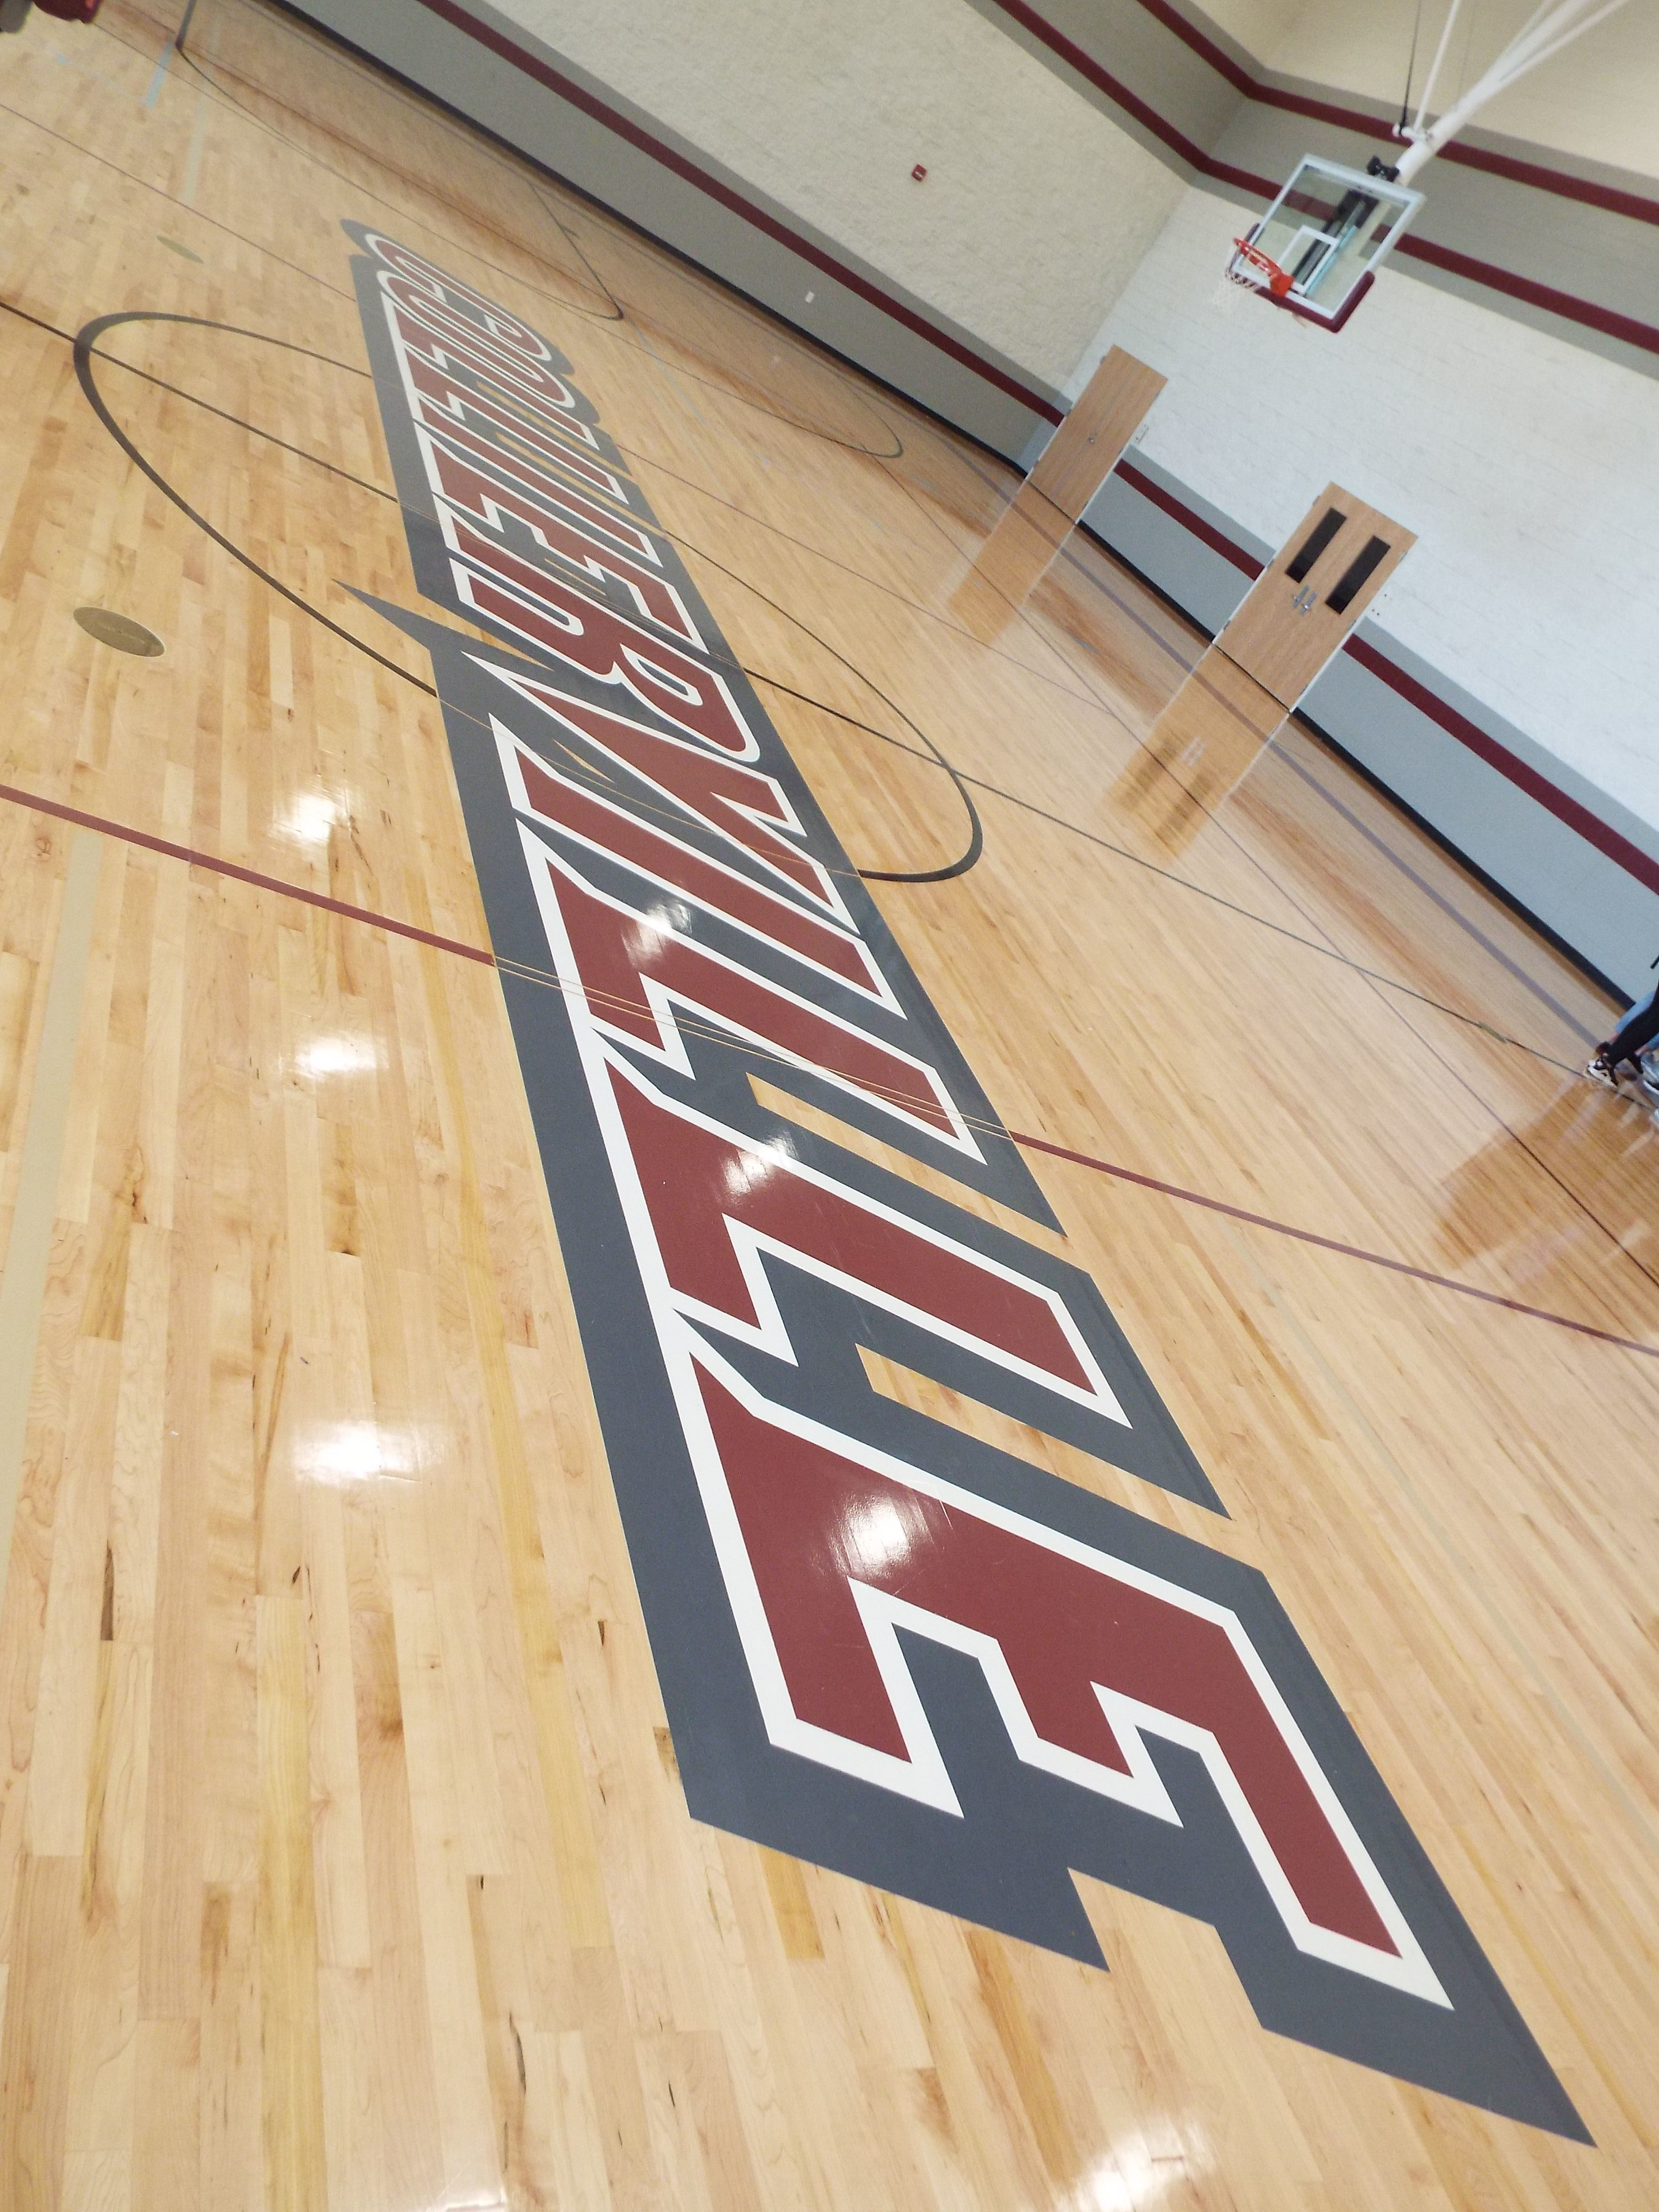 Collierville High School Auxiliary Gym 2